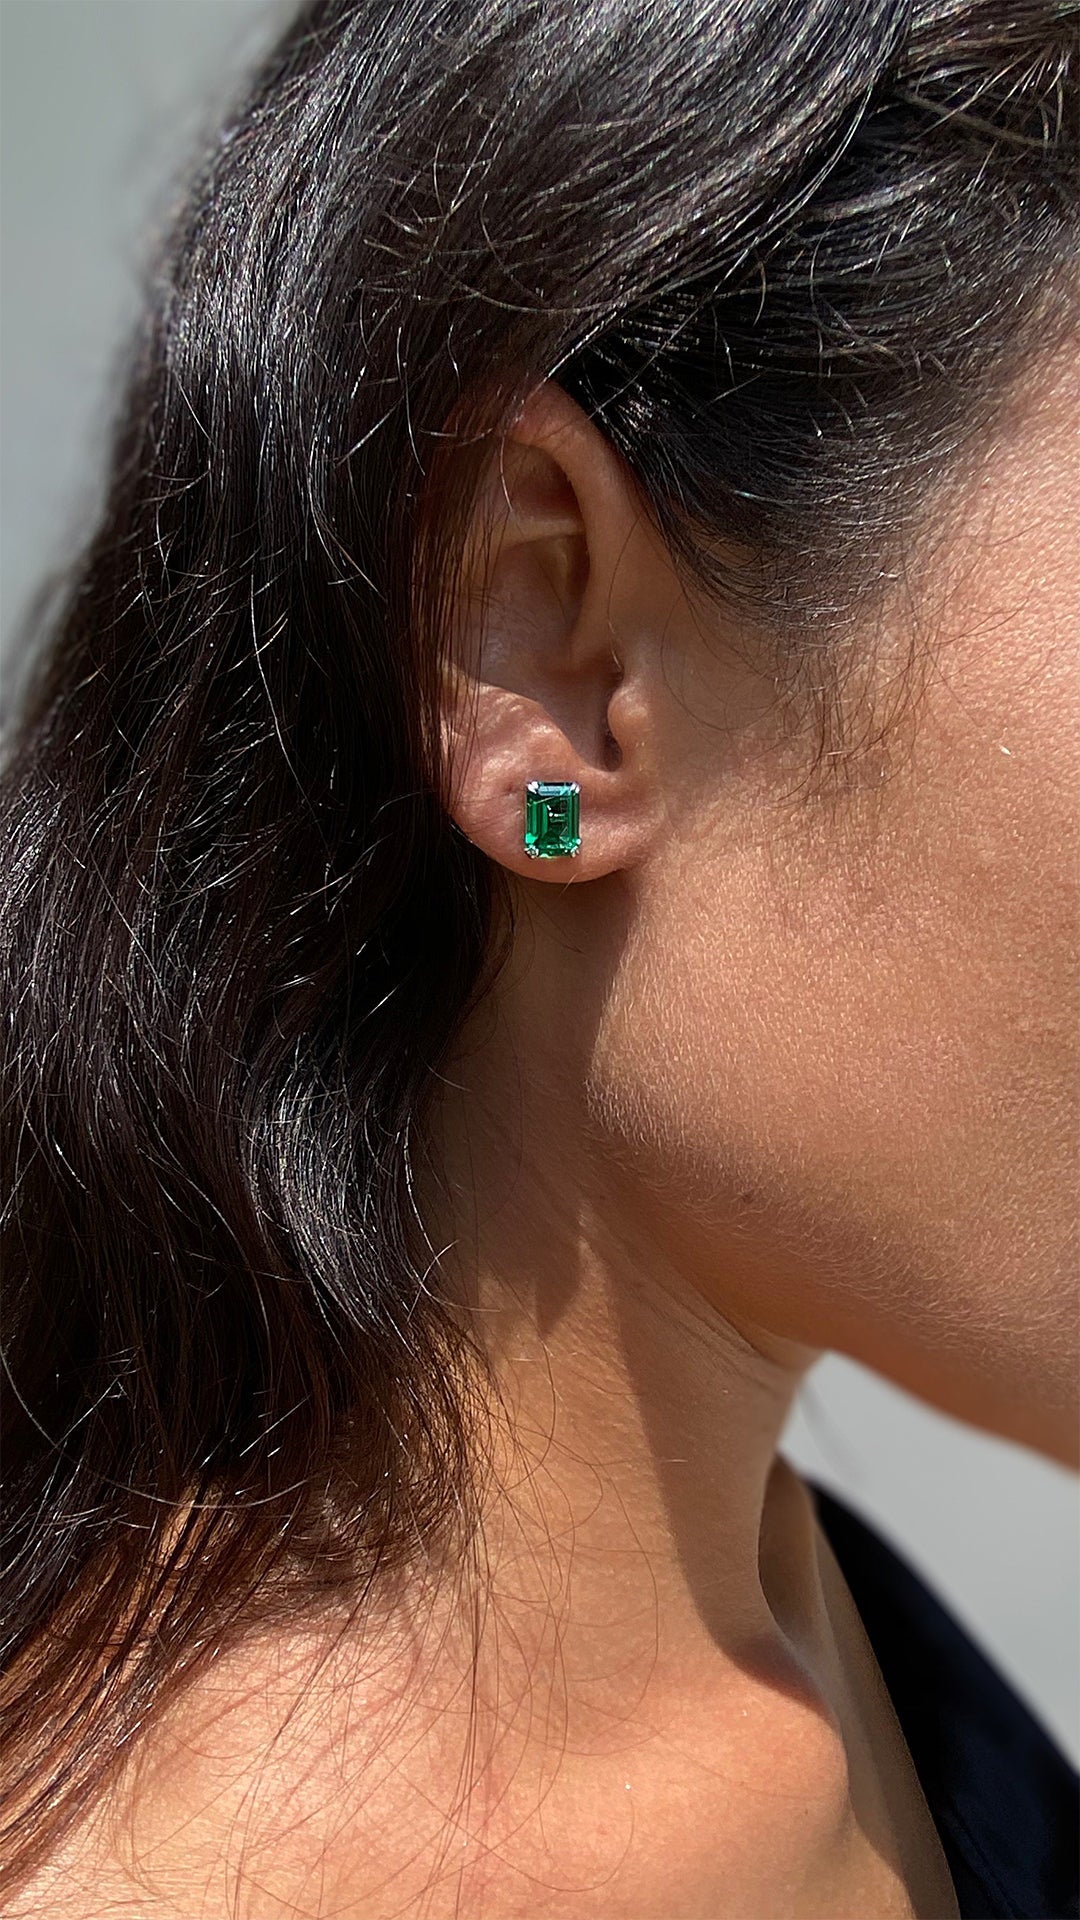 Fulton Emerald Green Double Prong Studs